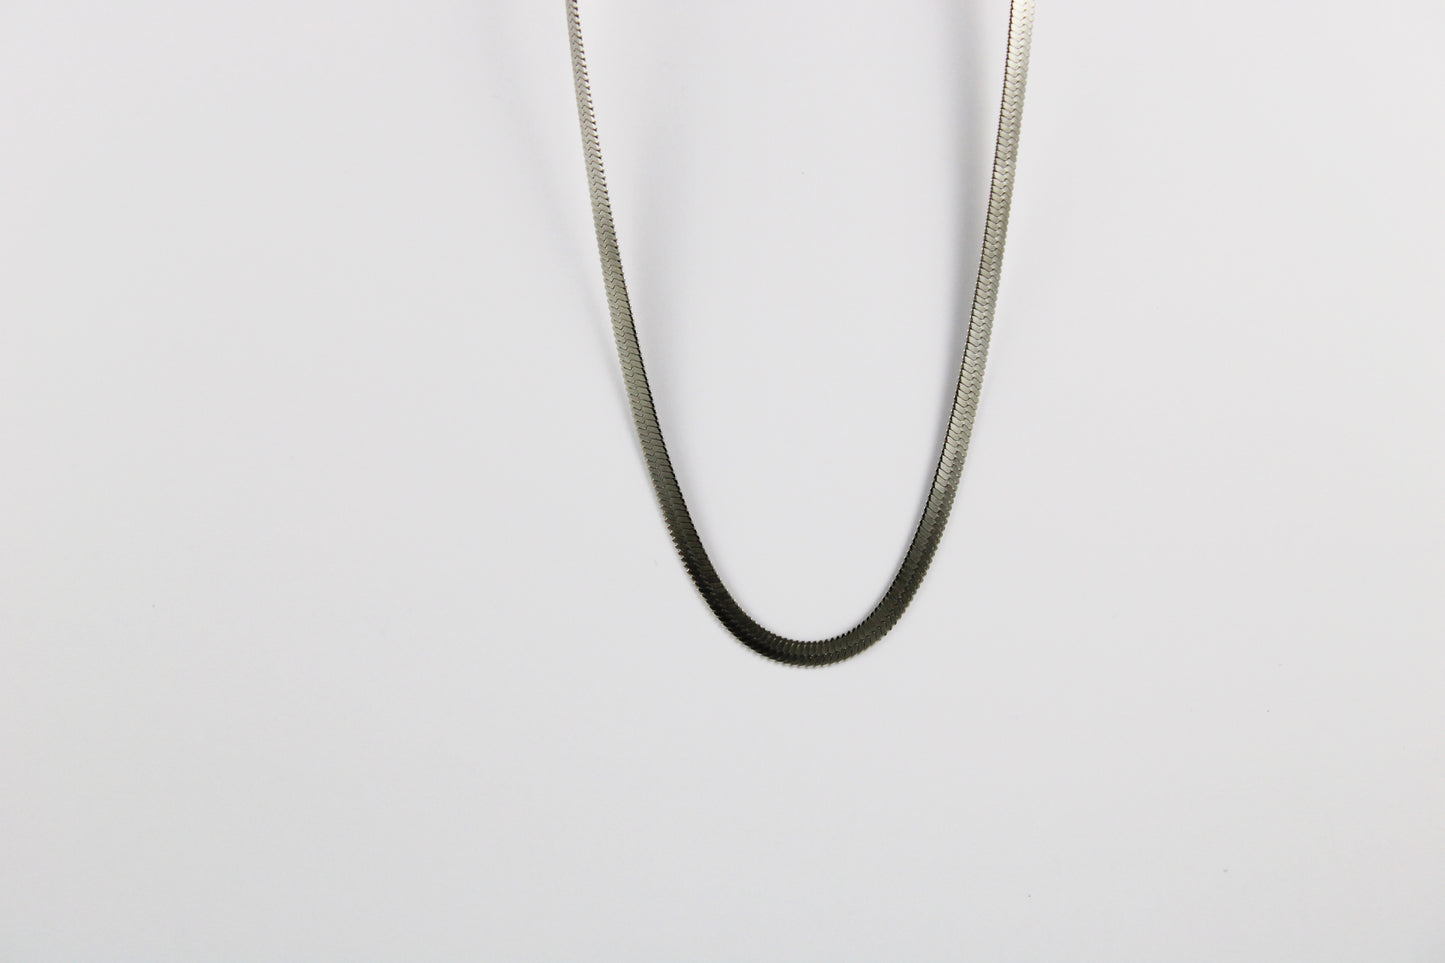 4mm silver snake chain